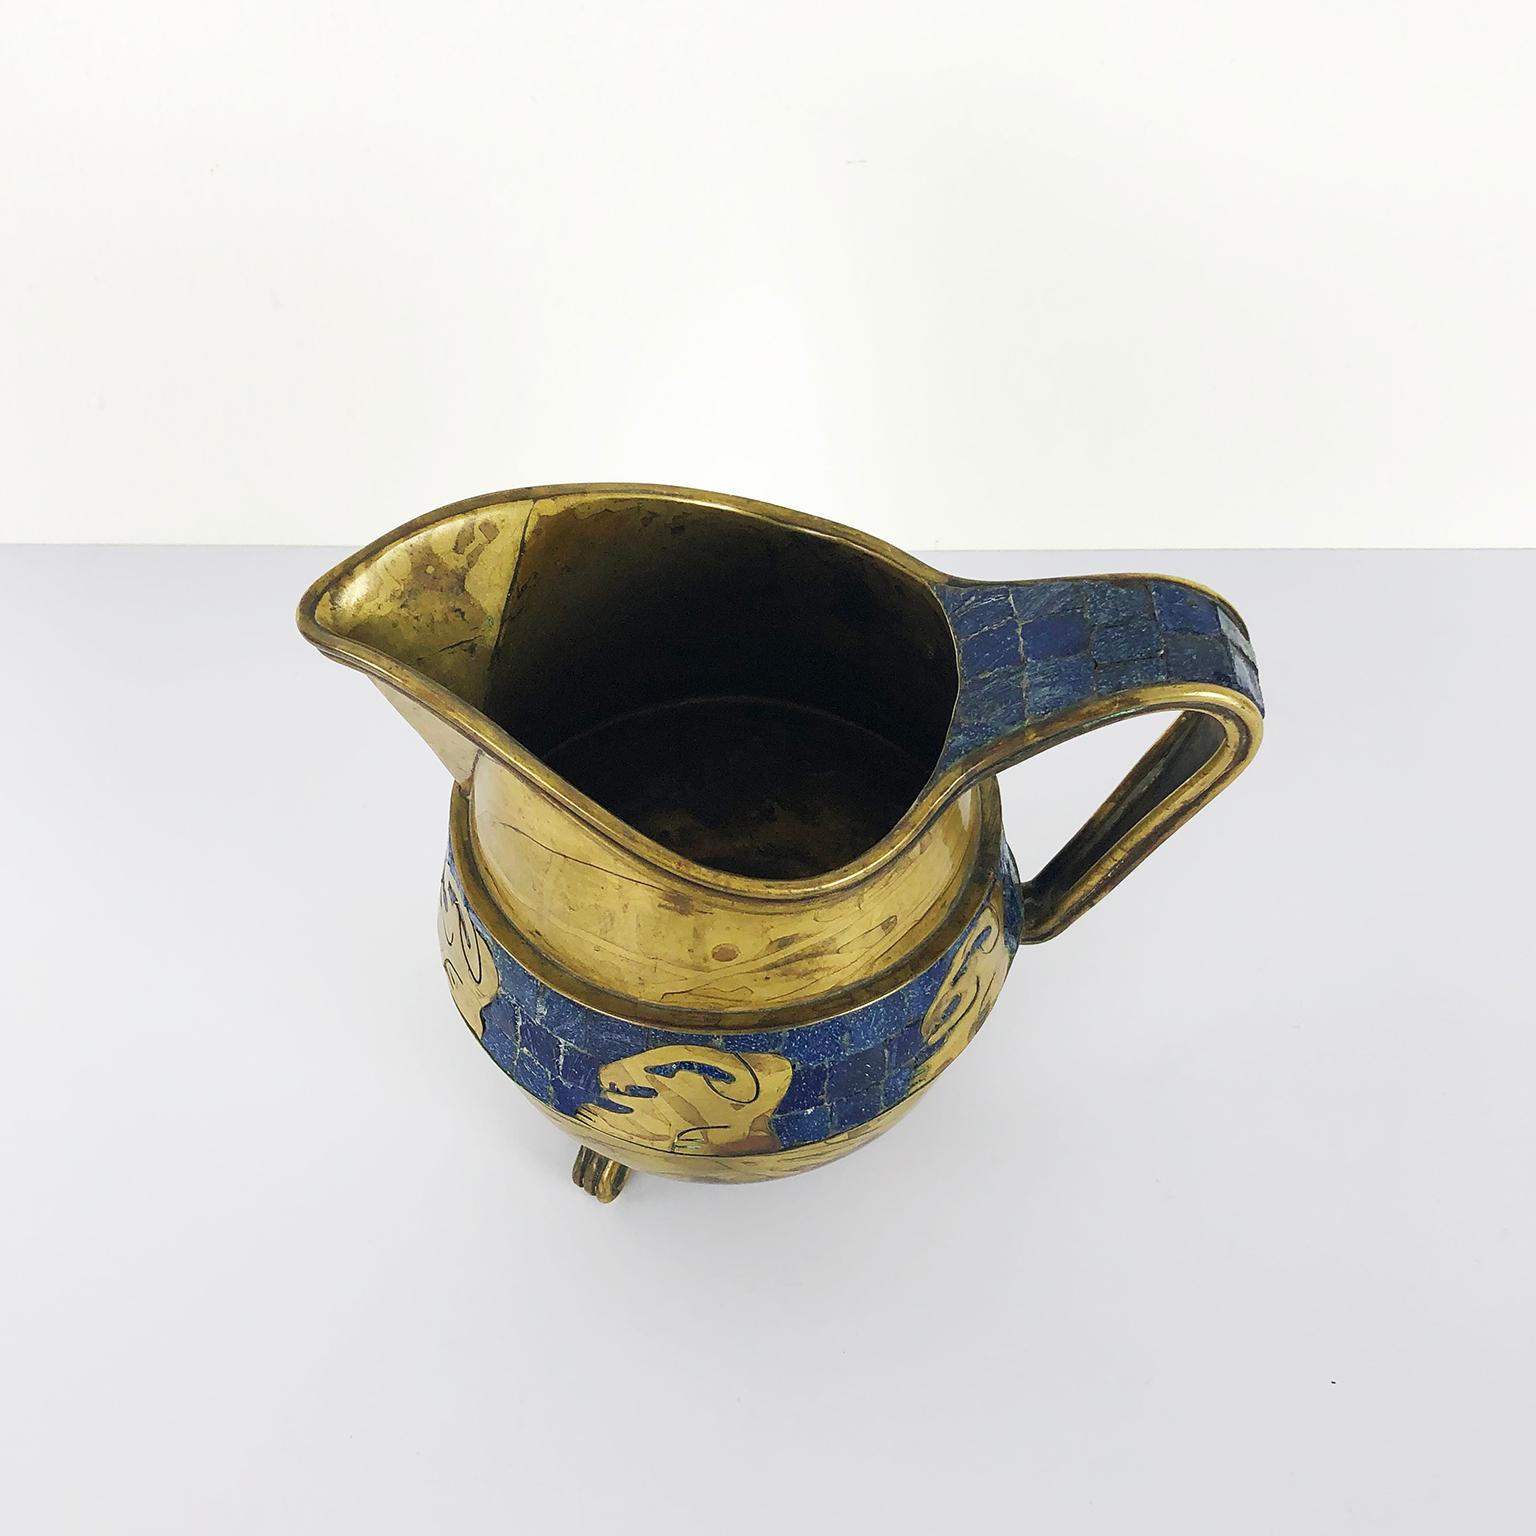 We offer this fantastic mosaic and brass pitcher designed by Salvador Teran in excellent vintage conditions, circa 1960.

About Salvador Teran: Born in Taxco, (1920-1974) trained with William Spratling at el Rancho 